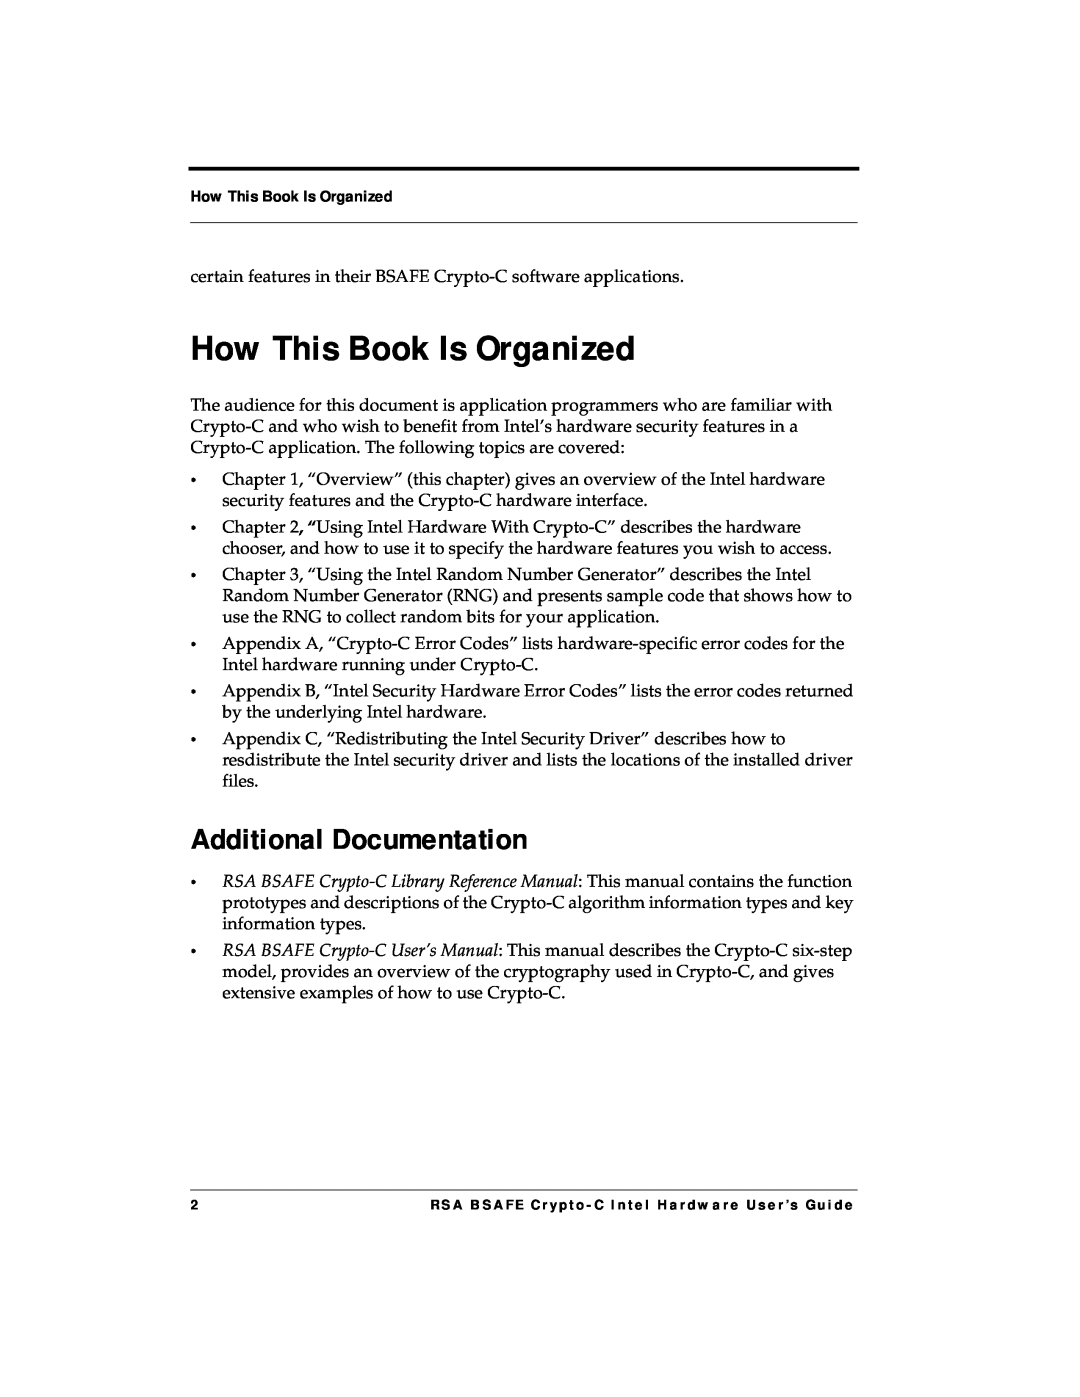 RSA Security 4.3 manual How This Book Is Organized, Additional Documentation 